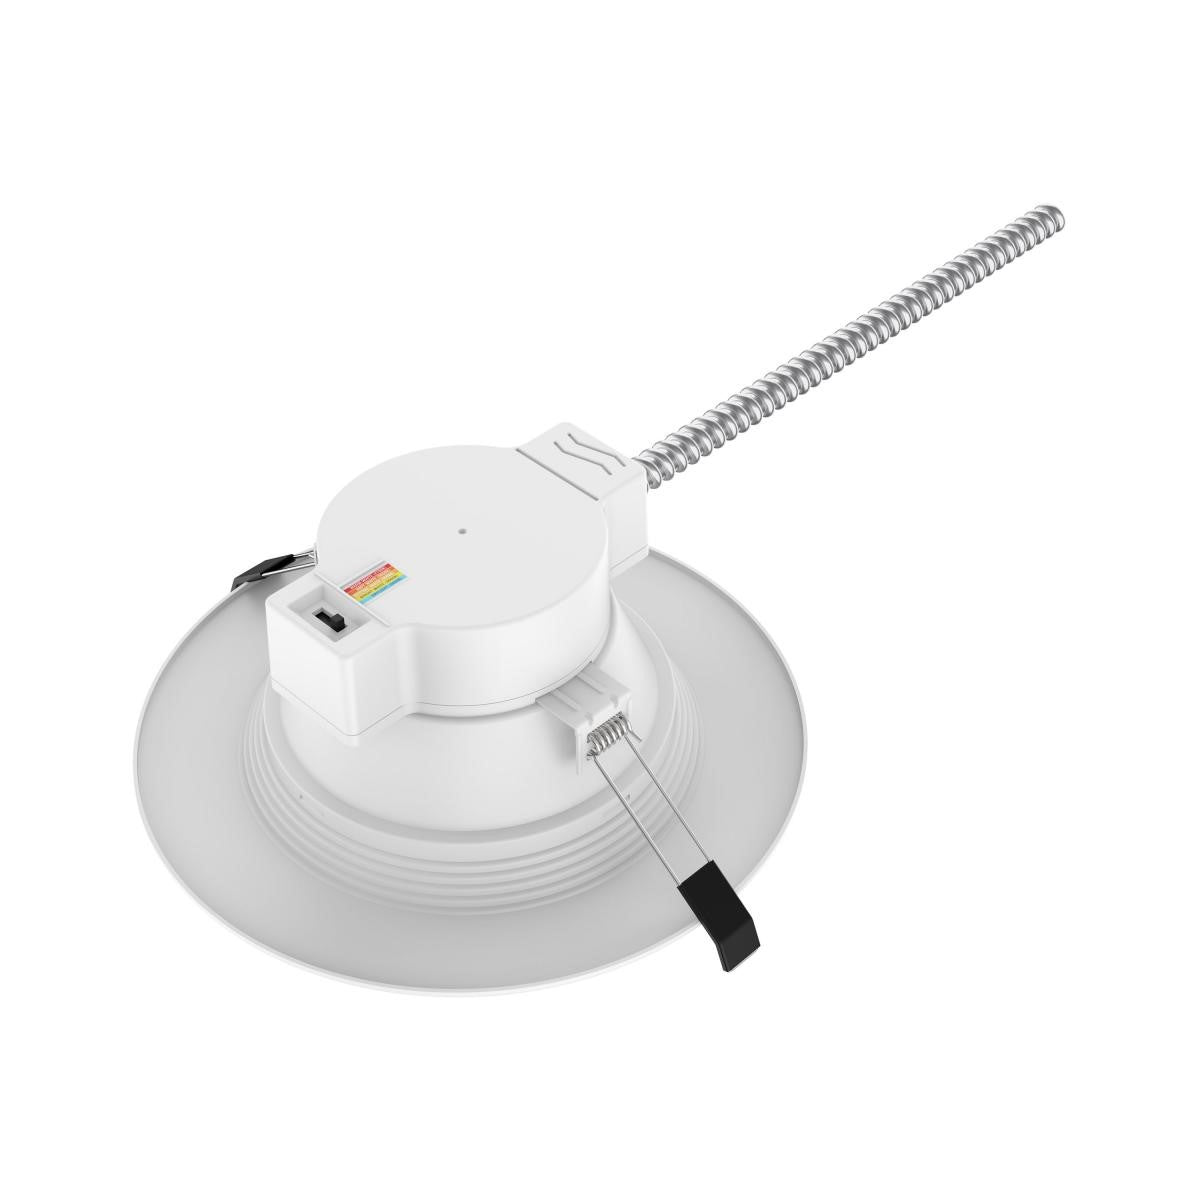 8 Inch Commercial LED Downlight, Round, 22 Watt, 2200 Lumens, Selectable CCT, 2700K to 5000K, Baffle Trim